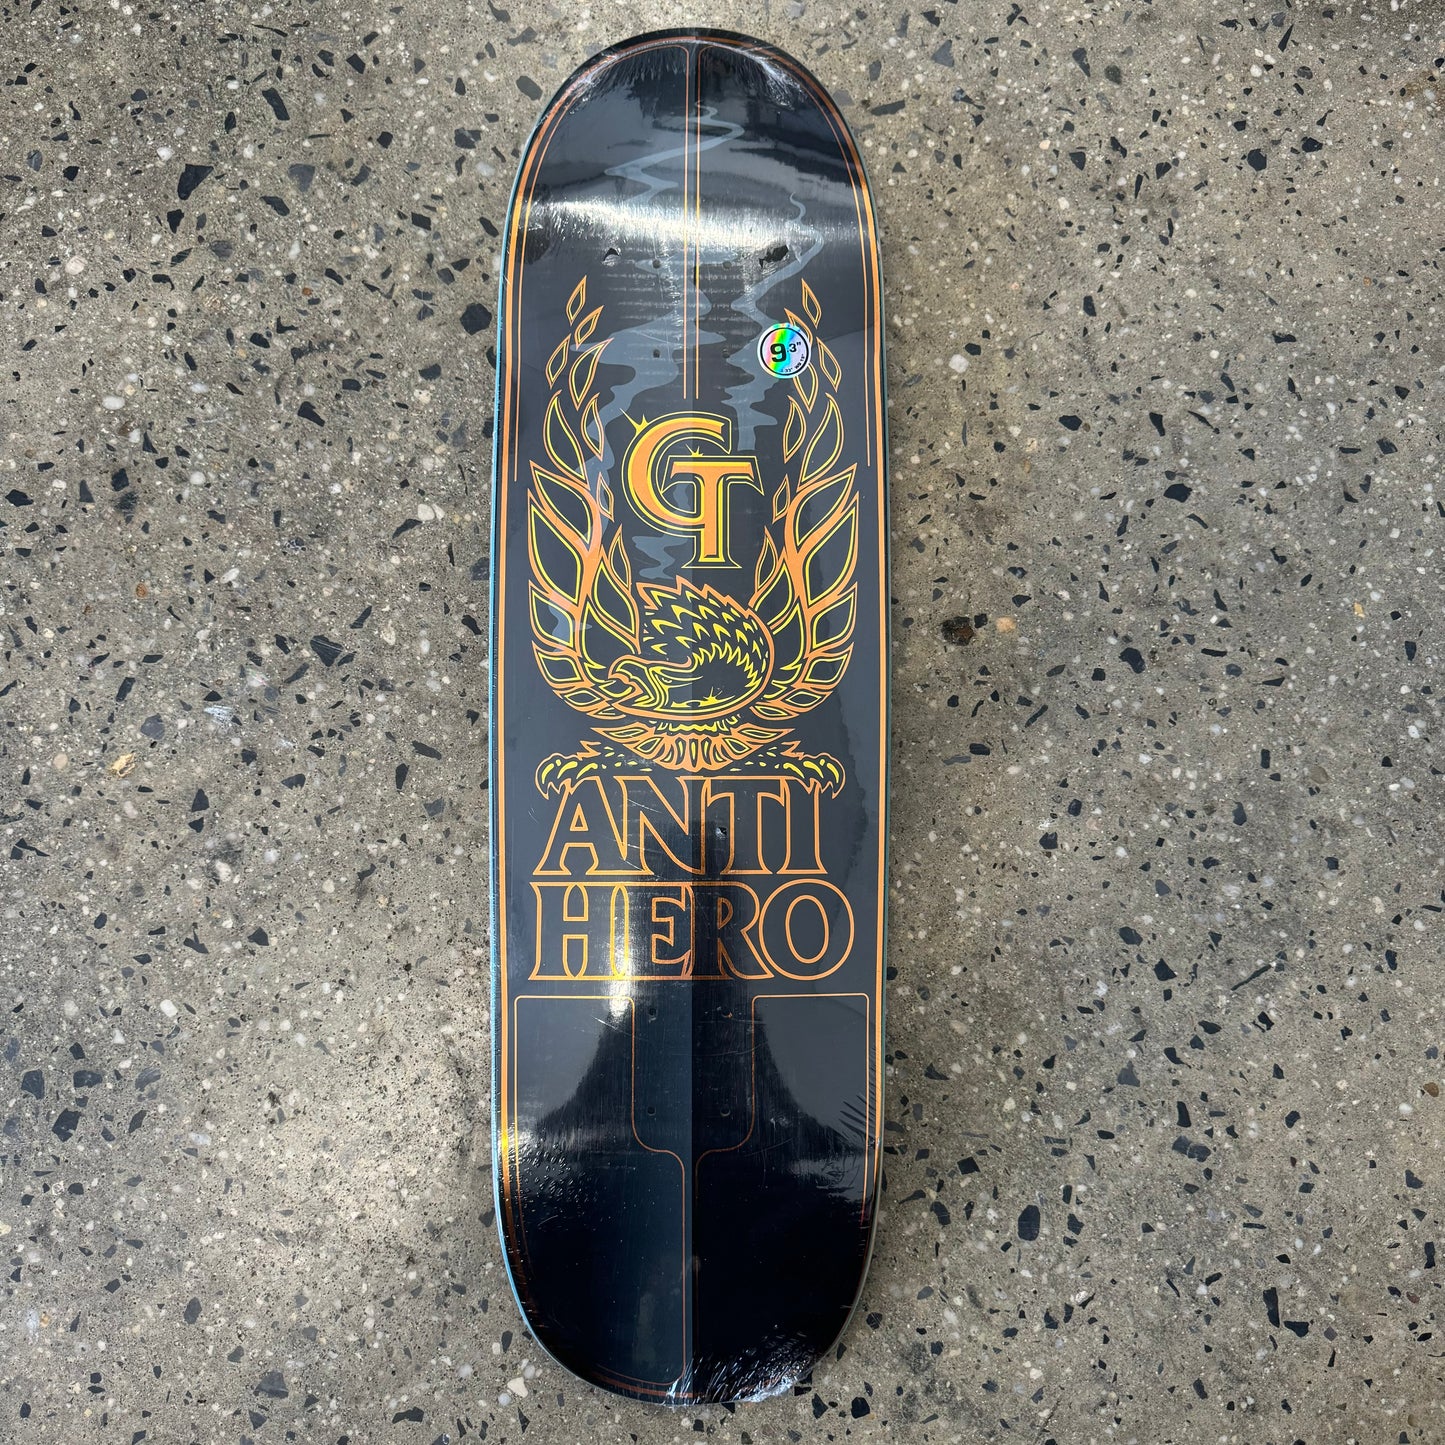 Yellow and gold GT logo with eagle and stacked anti hero logo, on black skate deck